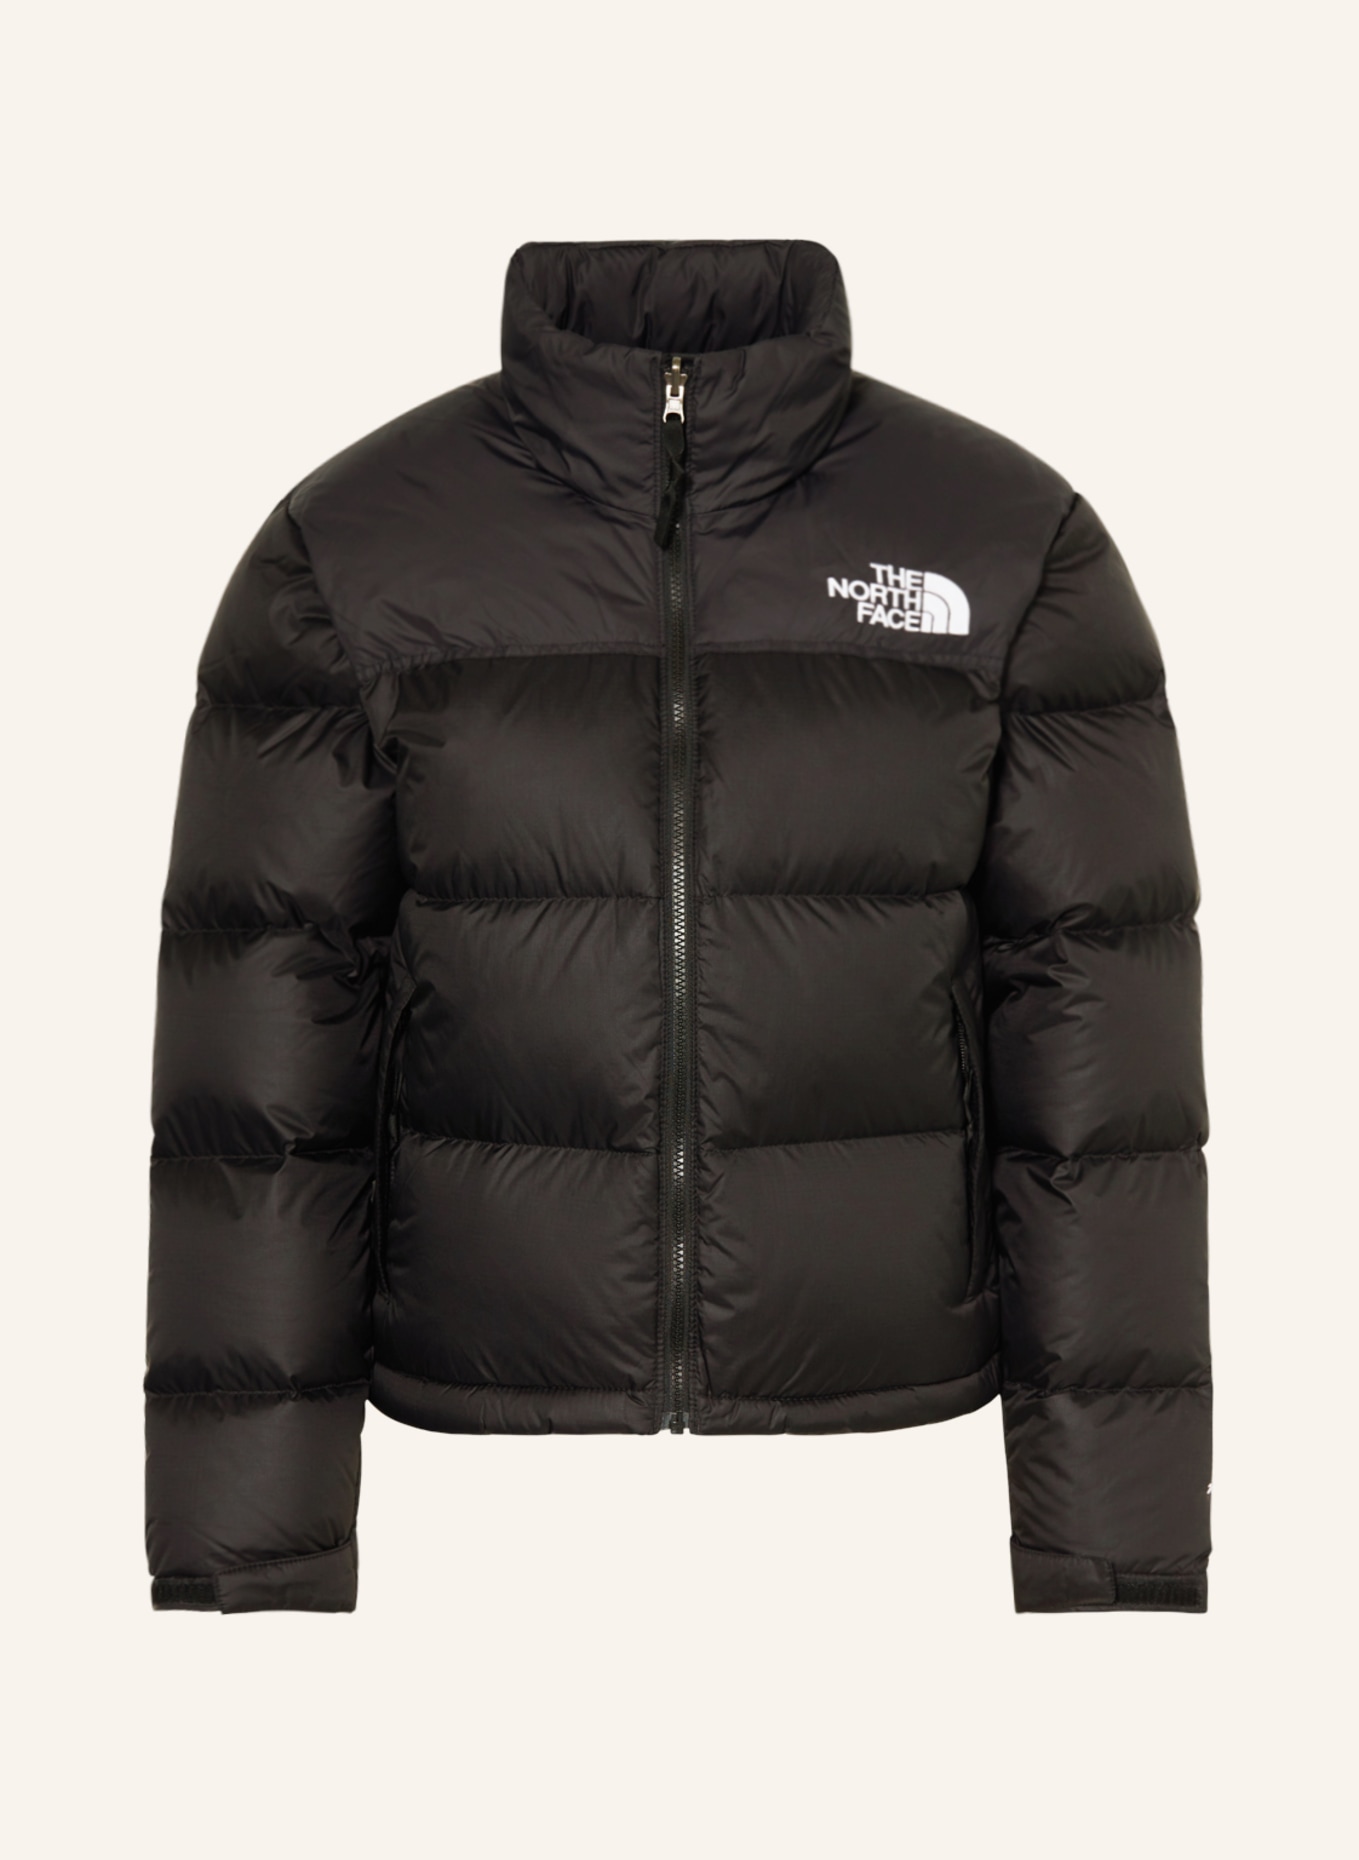 THE NORTH FACE Down jacket 1996